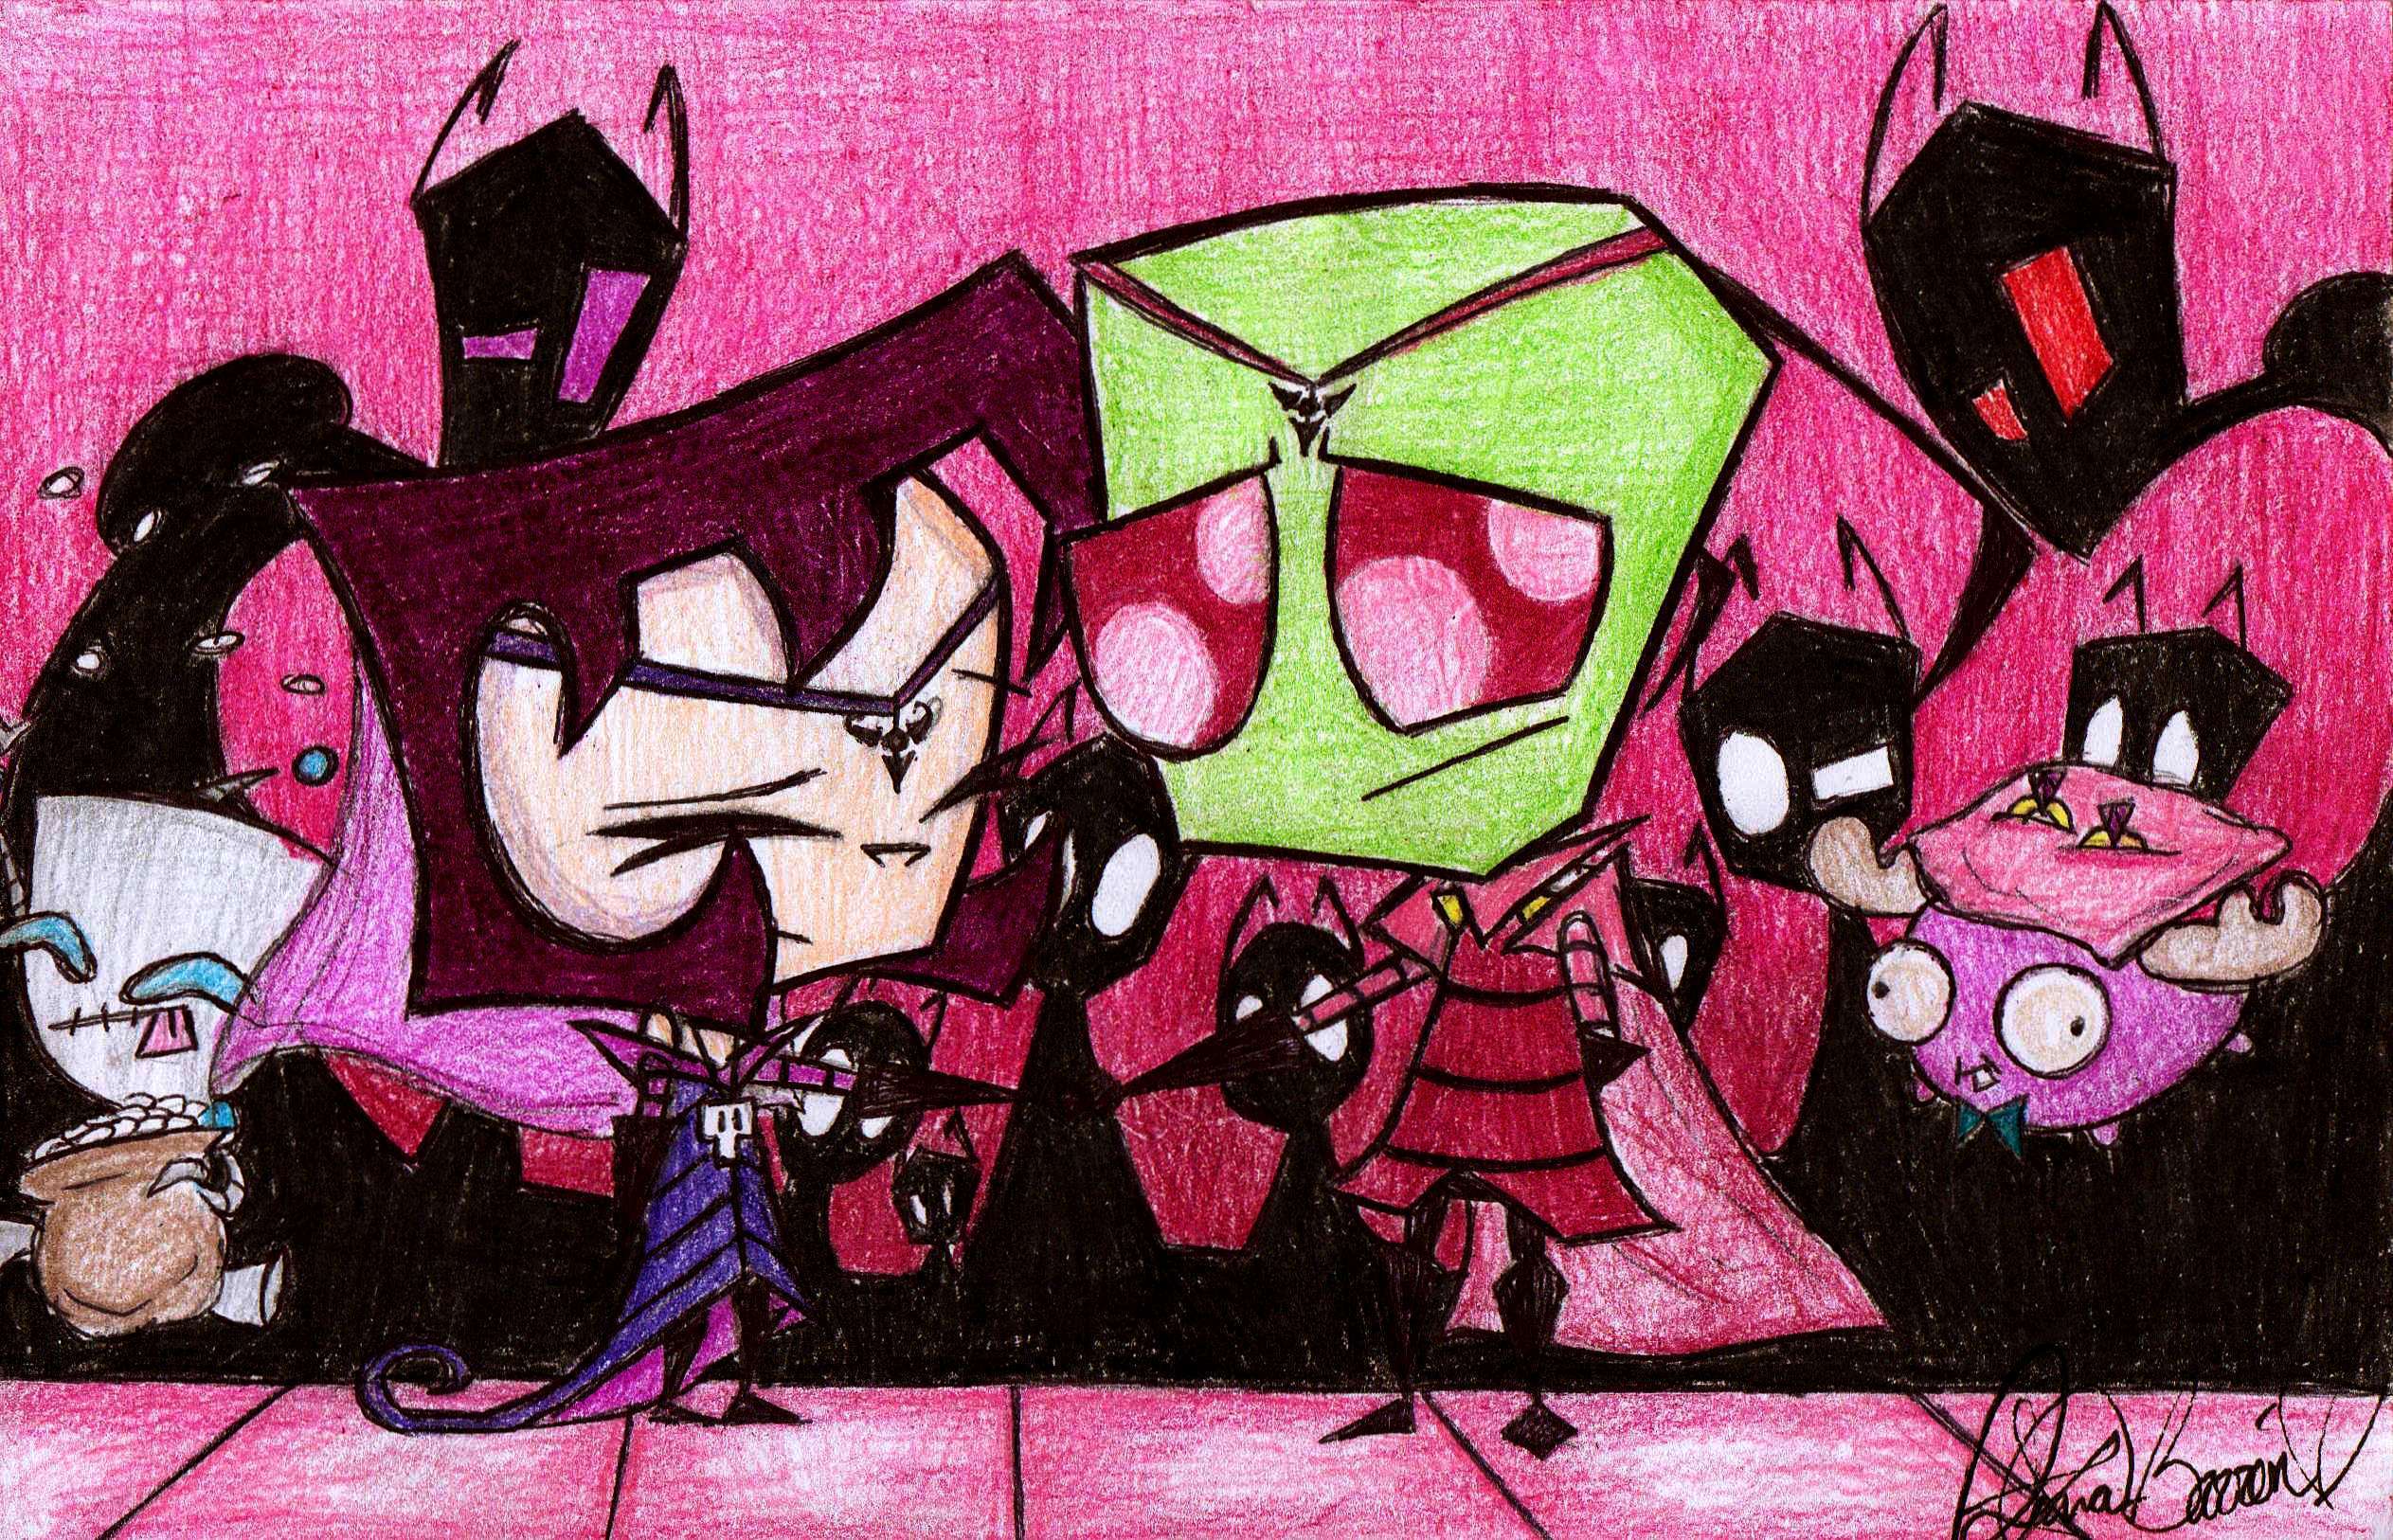 invader zim, images, image, wallpaper, photos, photo, photograph, gallery